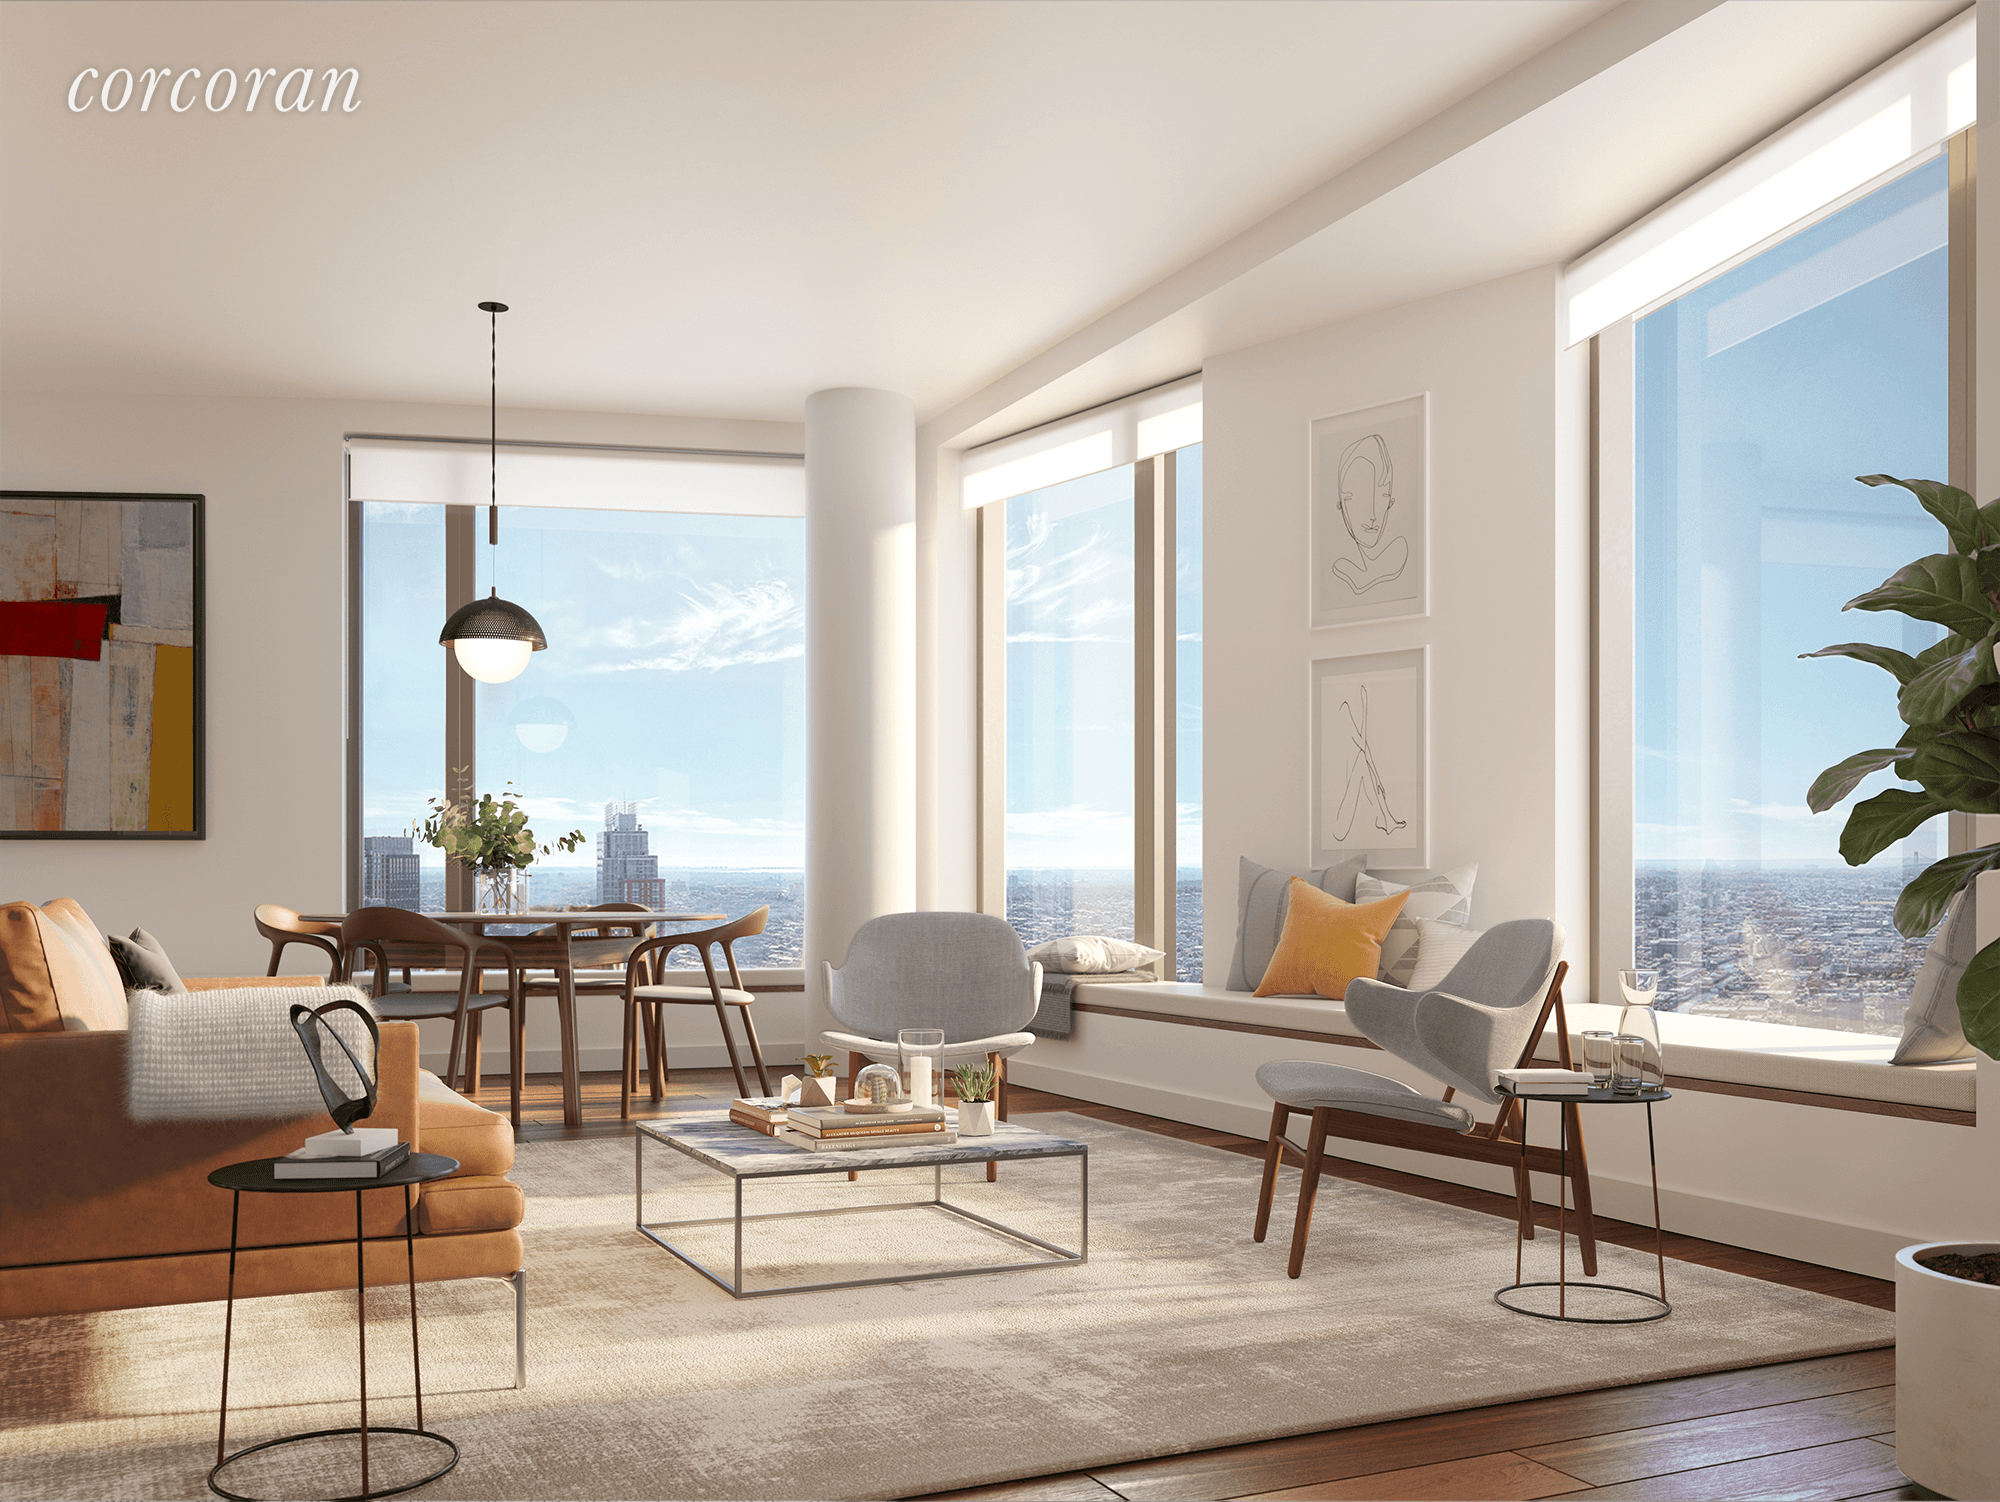 Tishman Speyers 11 Hoyt sets Brooklyns new standard for architecture and design.